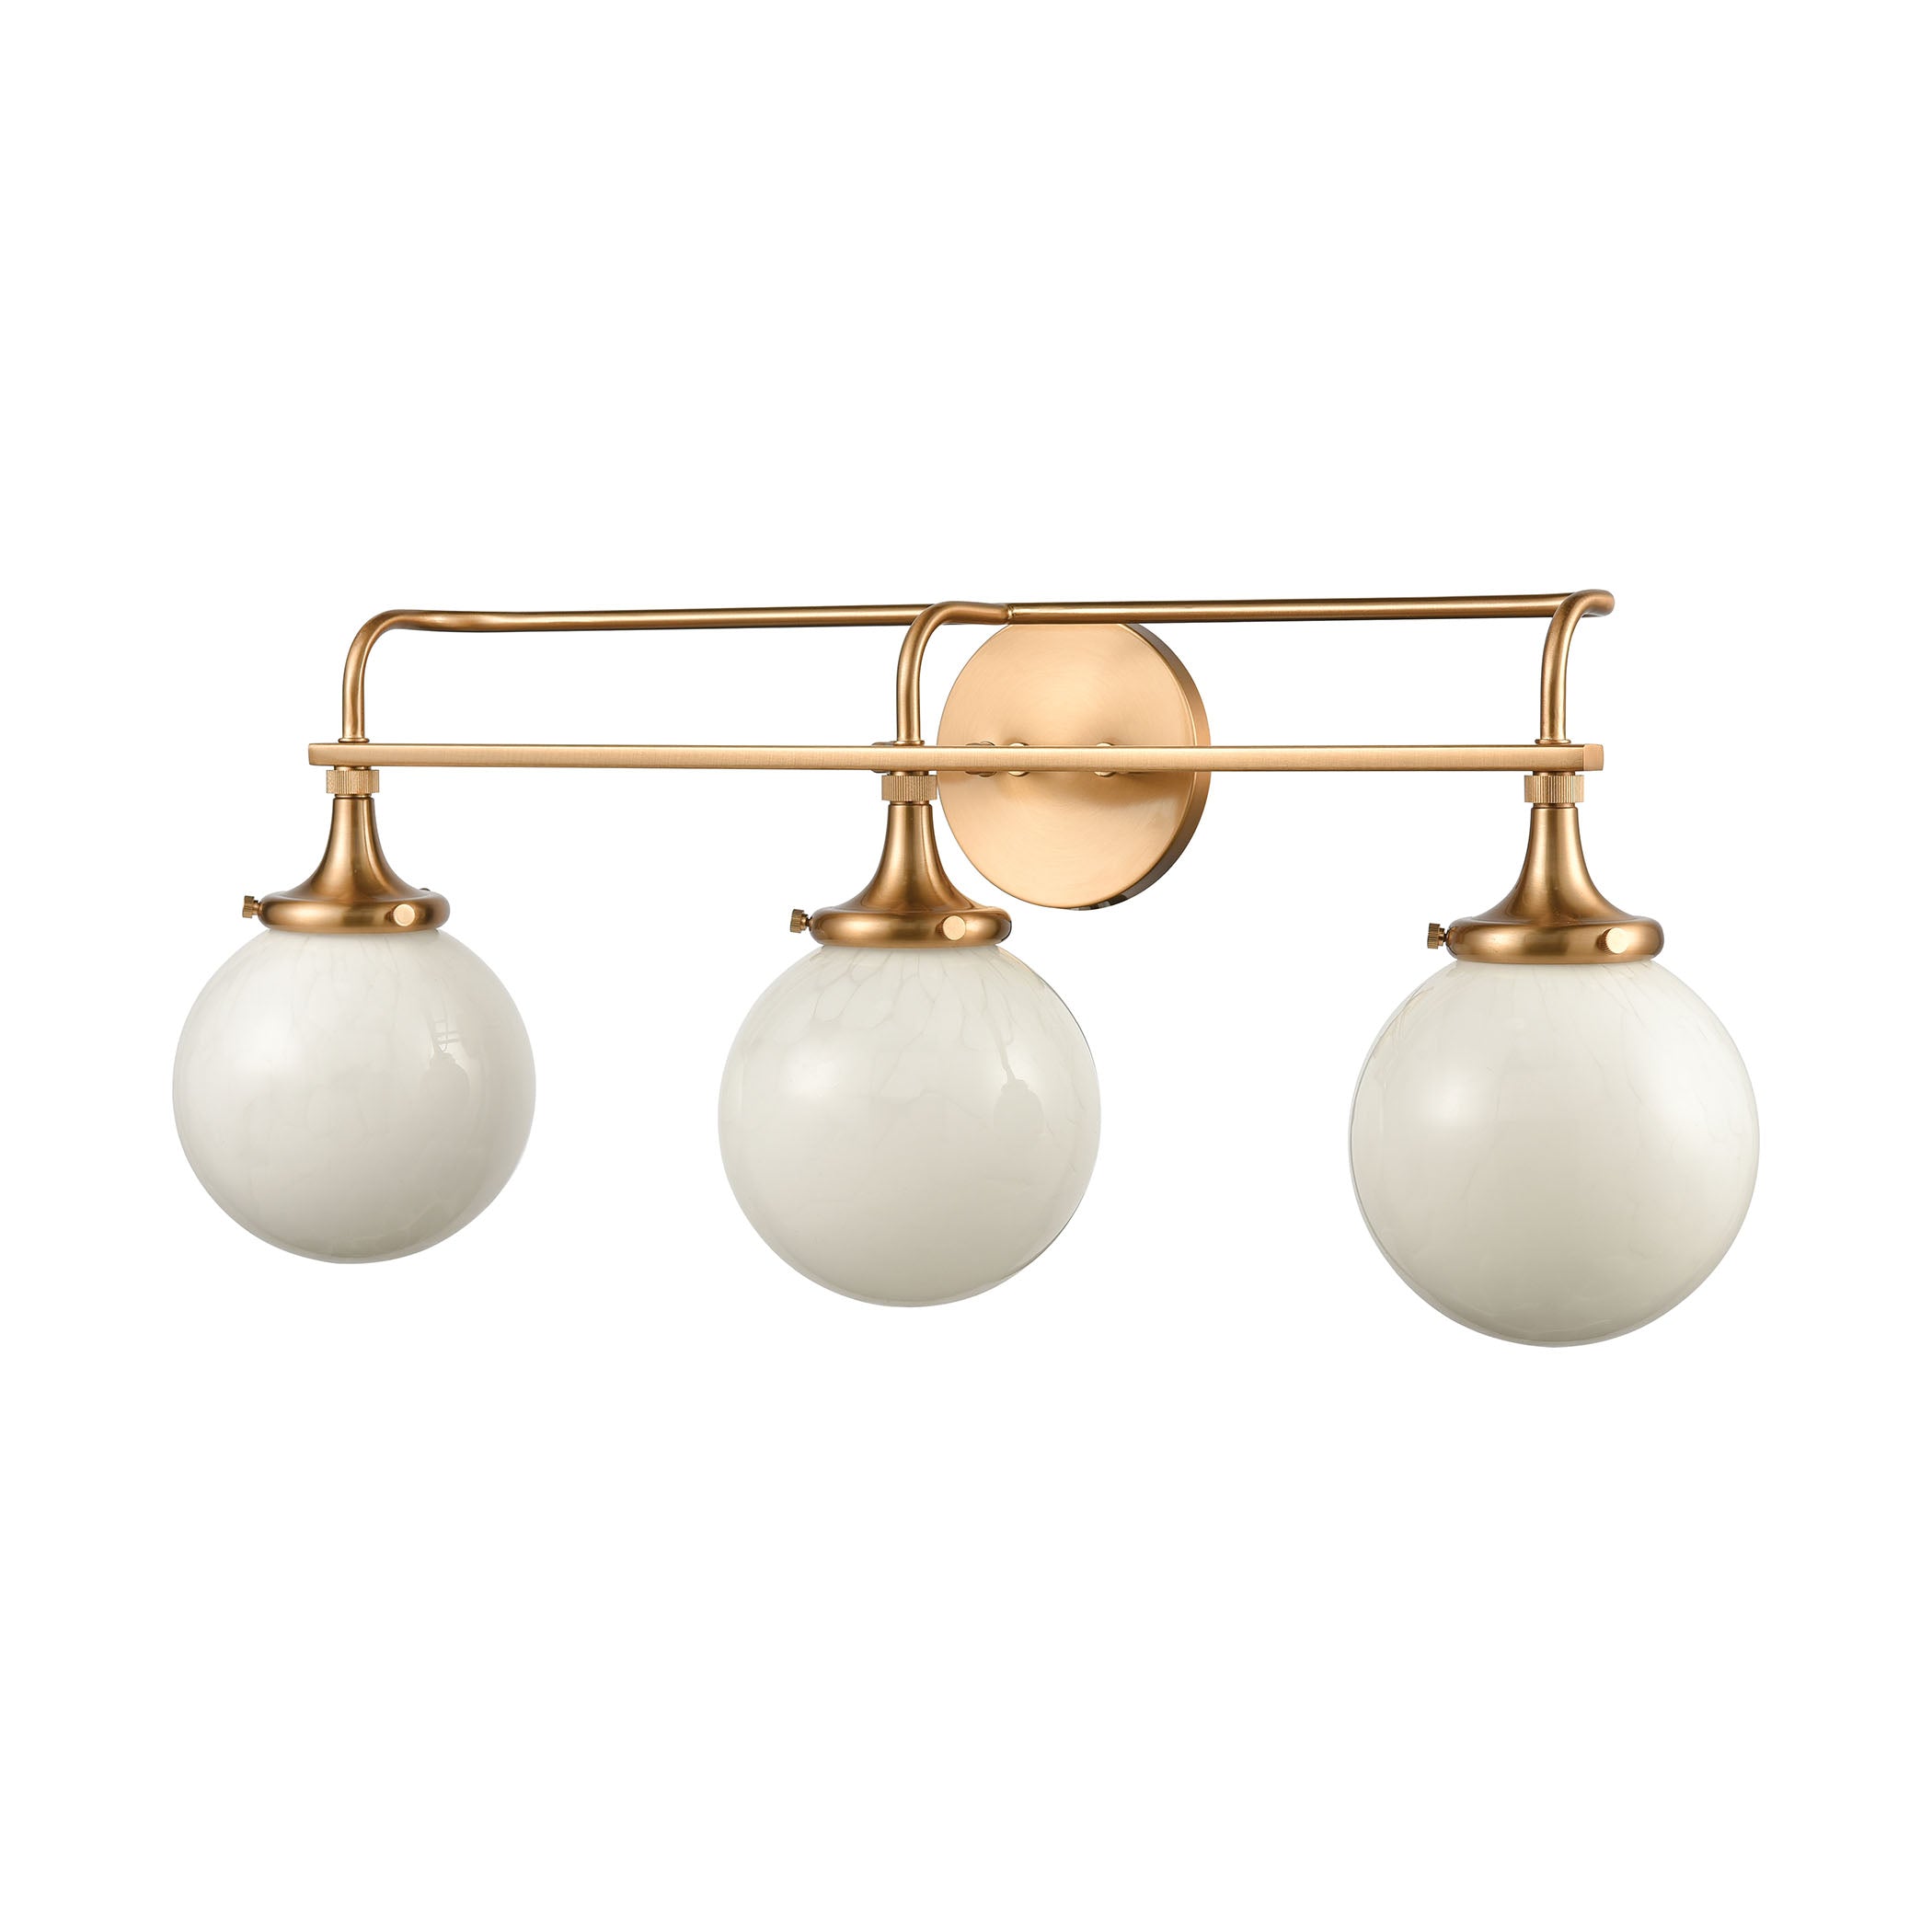 ELK Lighting 30143/3 Beverly Hills 3-Light Vanity Light in Satin Brass with White Feathered Glass